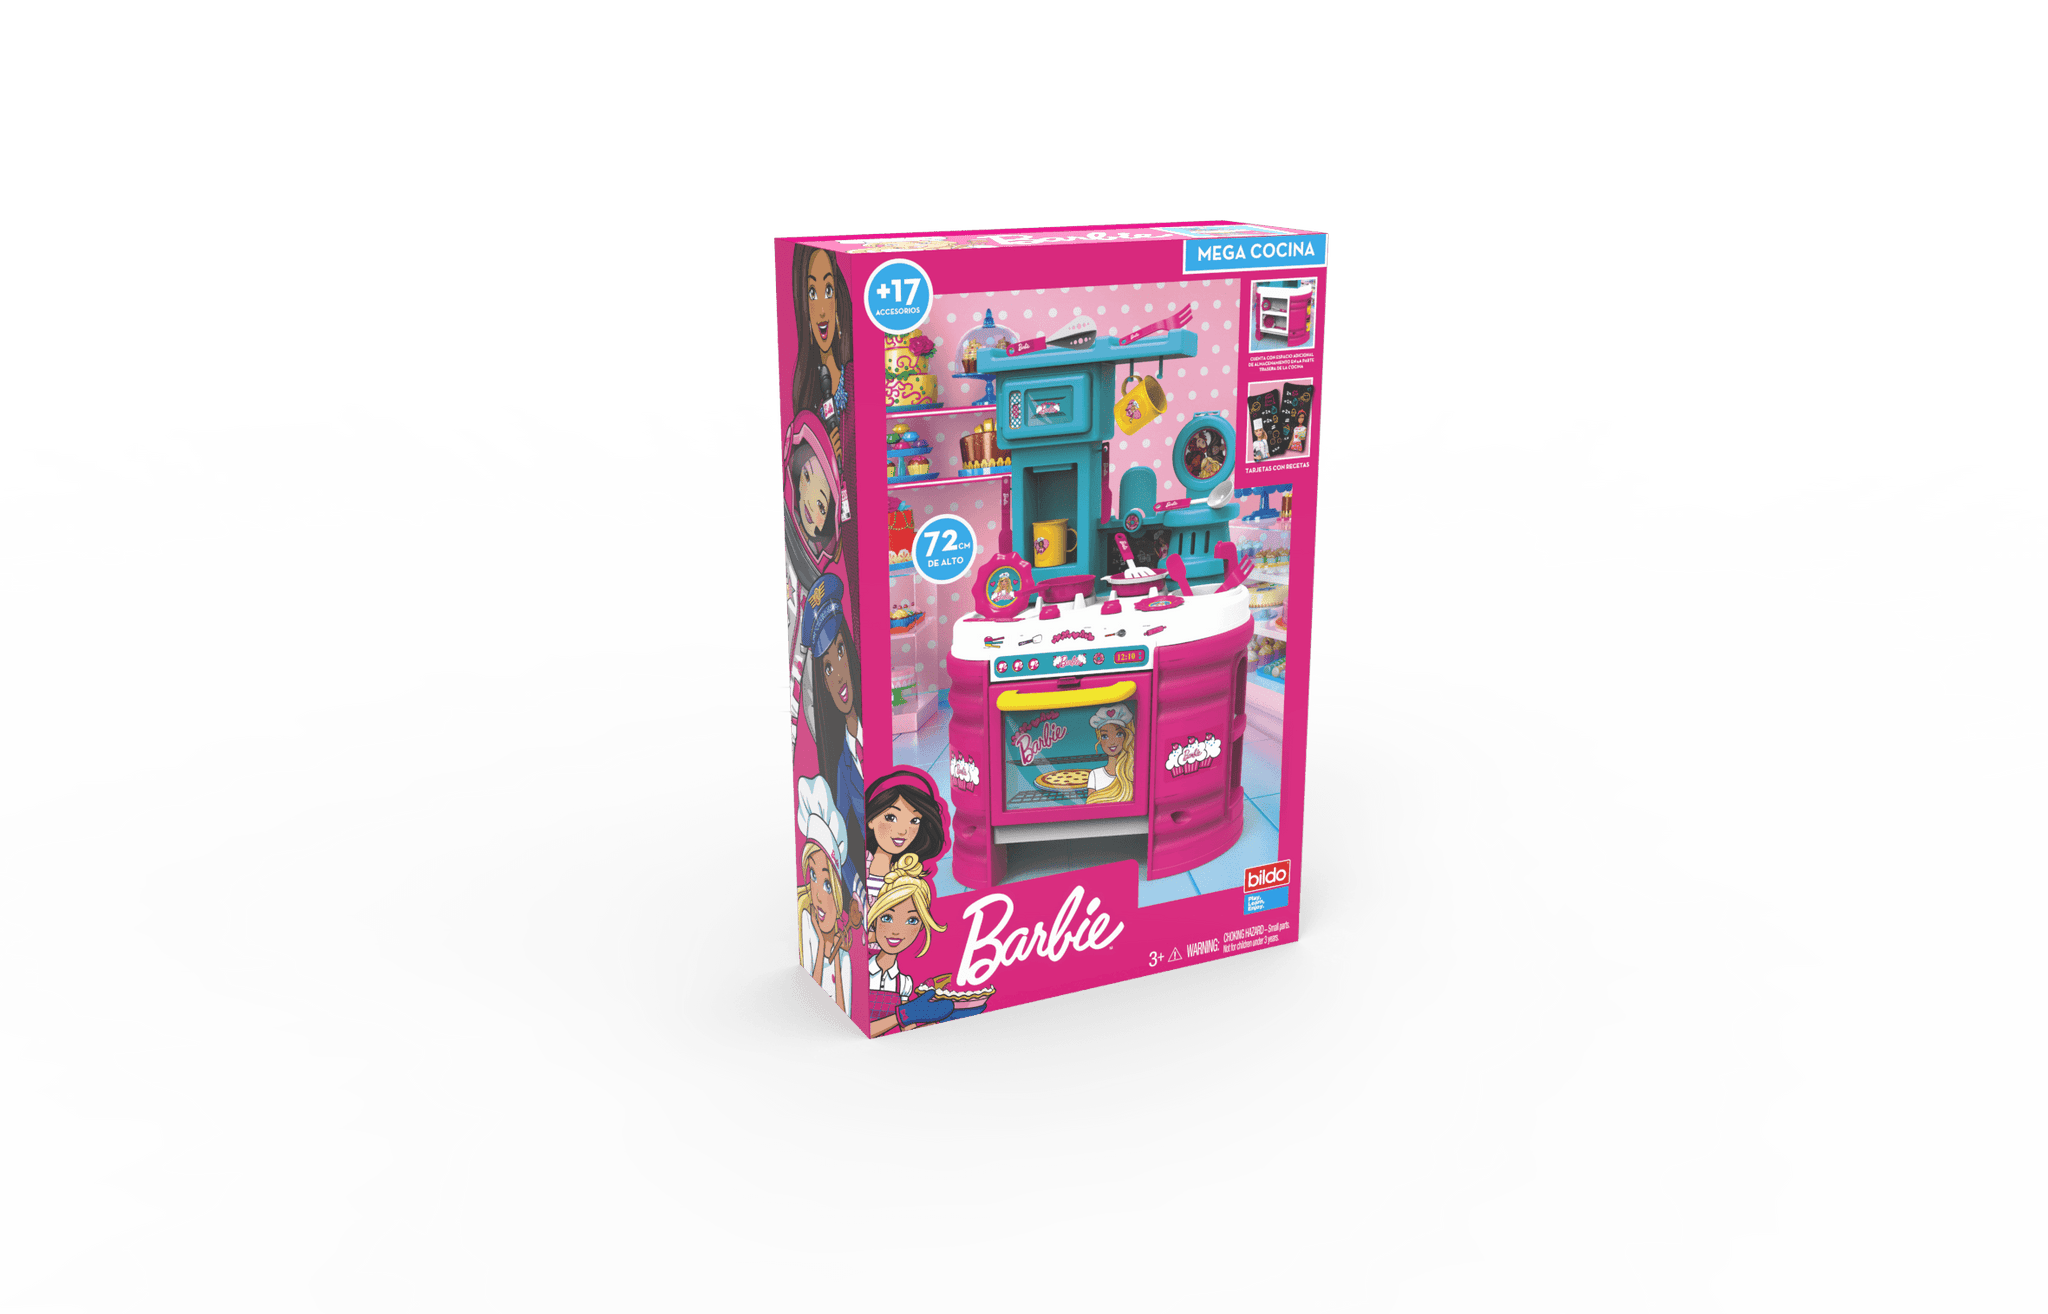 NASA  Barbie Mega Kitchen: Barbie presents a range of exciting toys for the young and budding minds - 2101